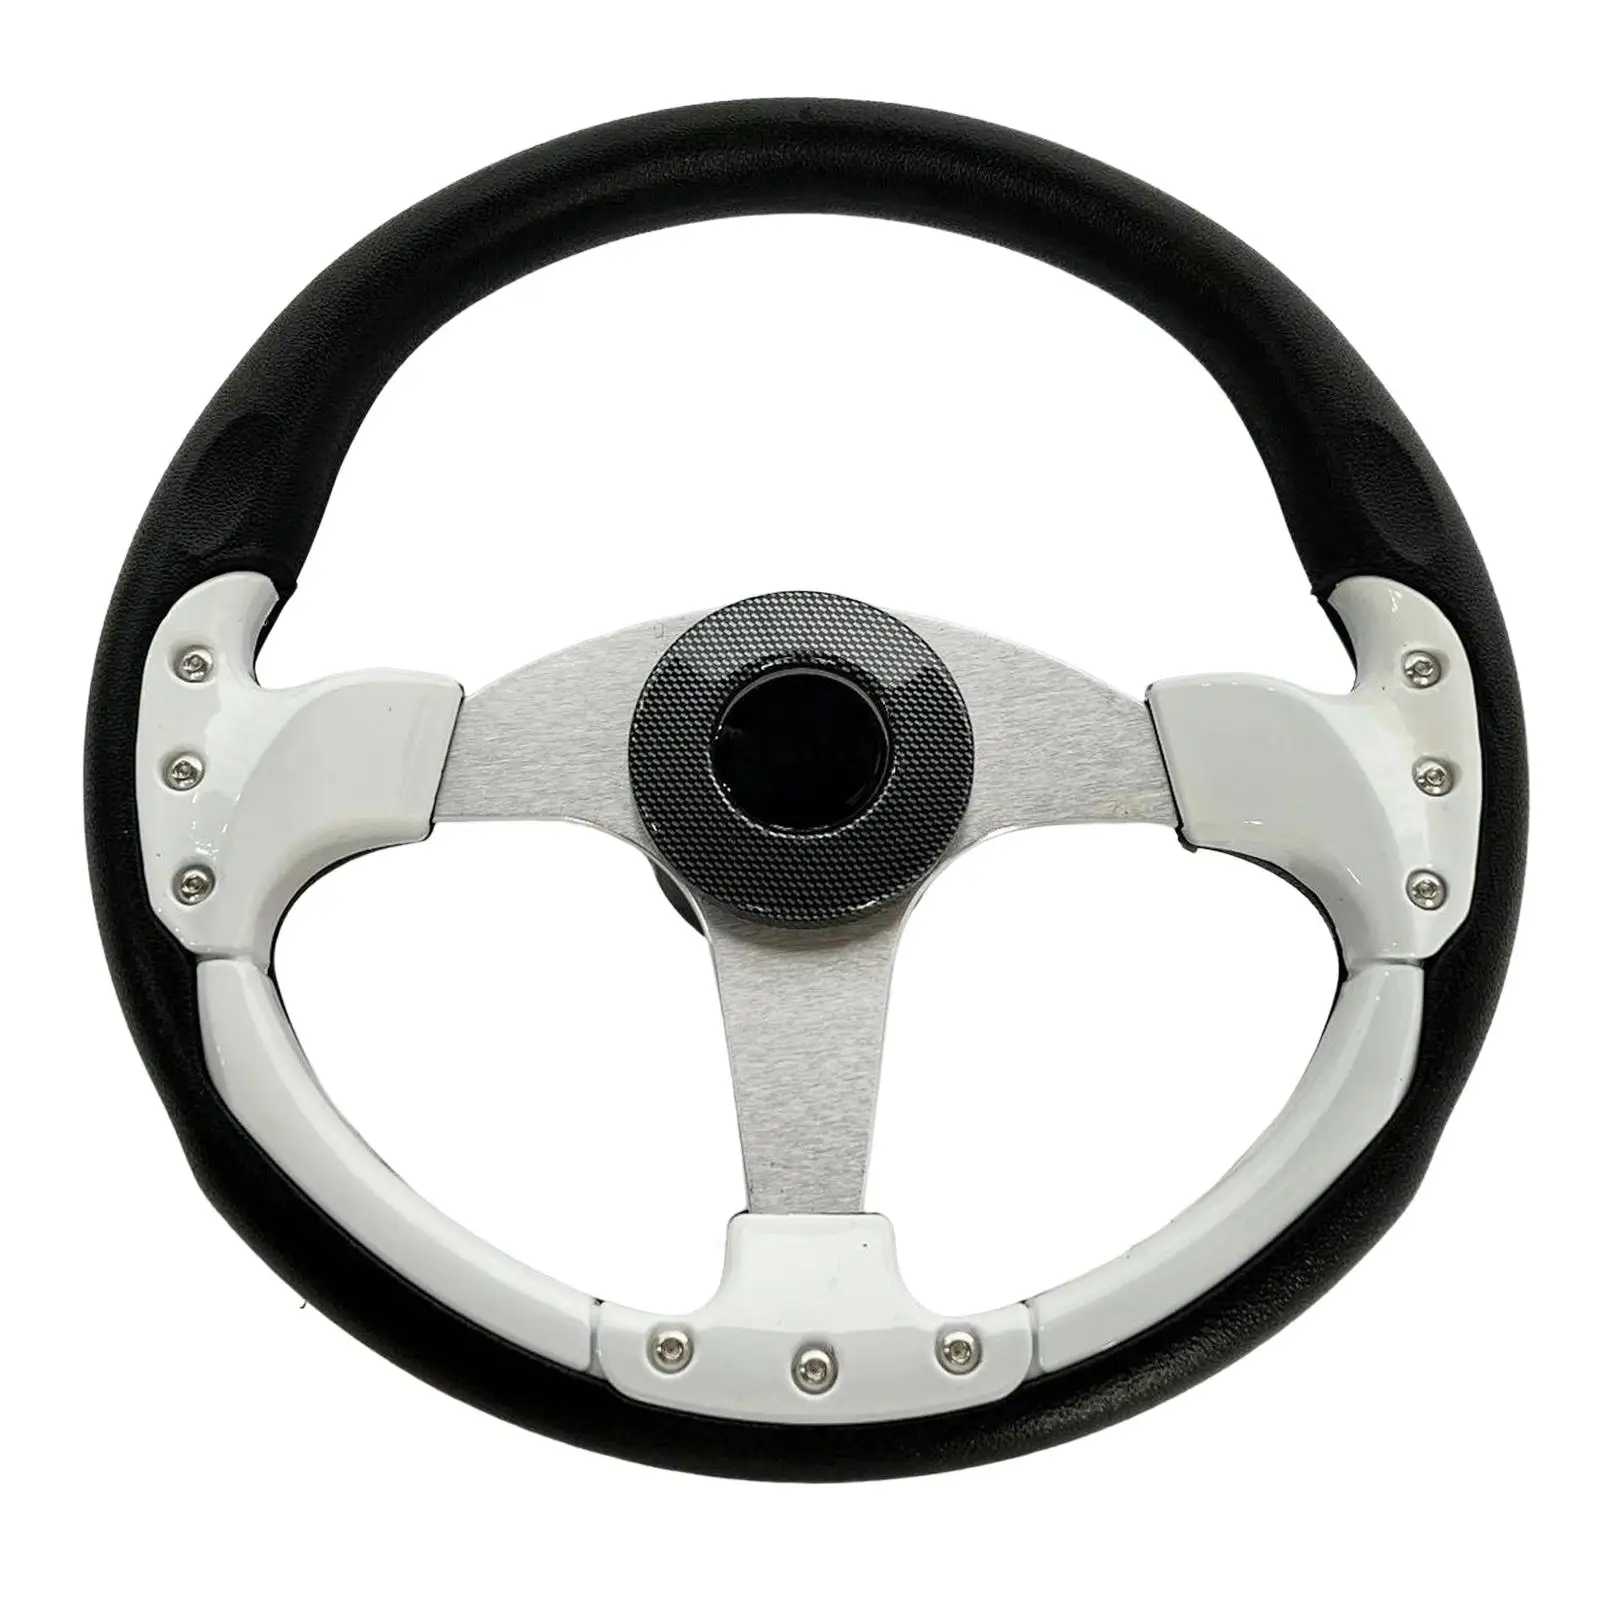 3 Spoke 350mm Boat Steering Wheel Replacement Nonslip for Marine Boats